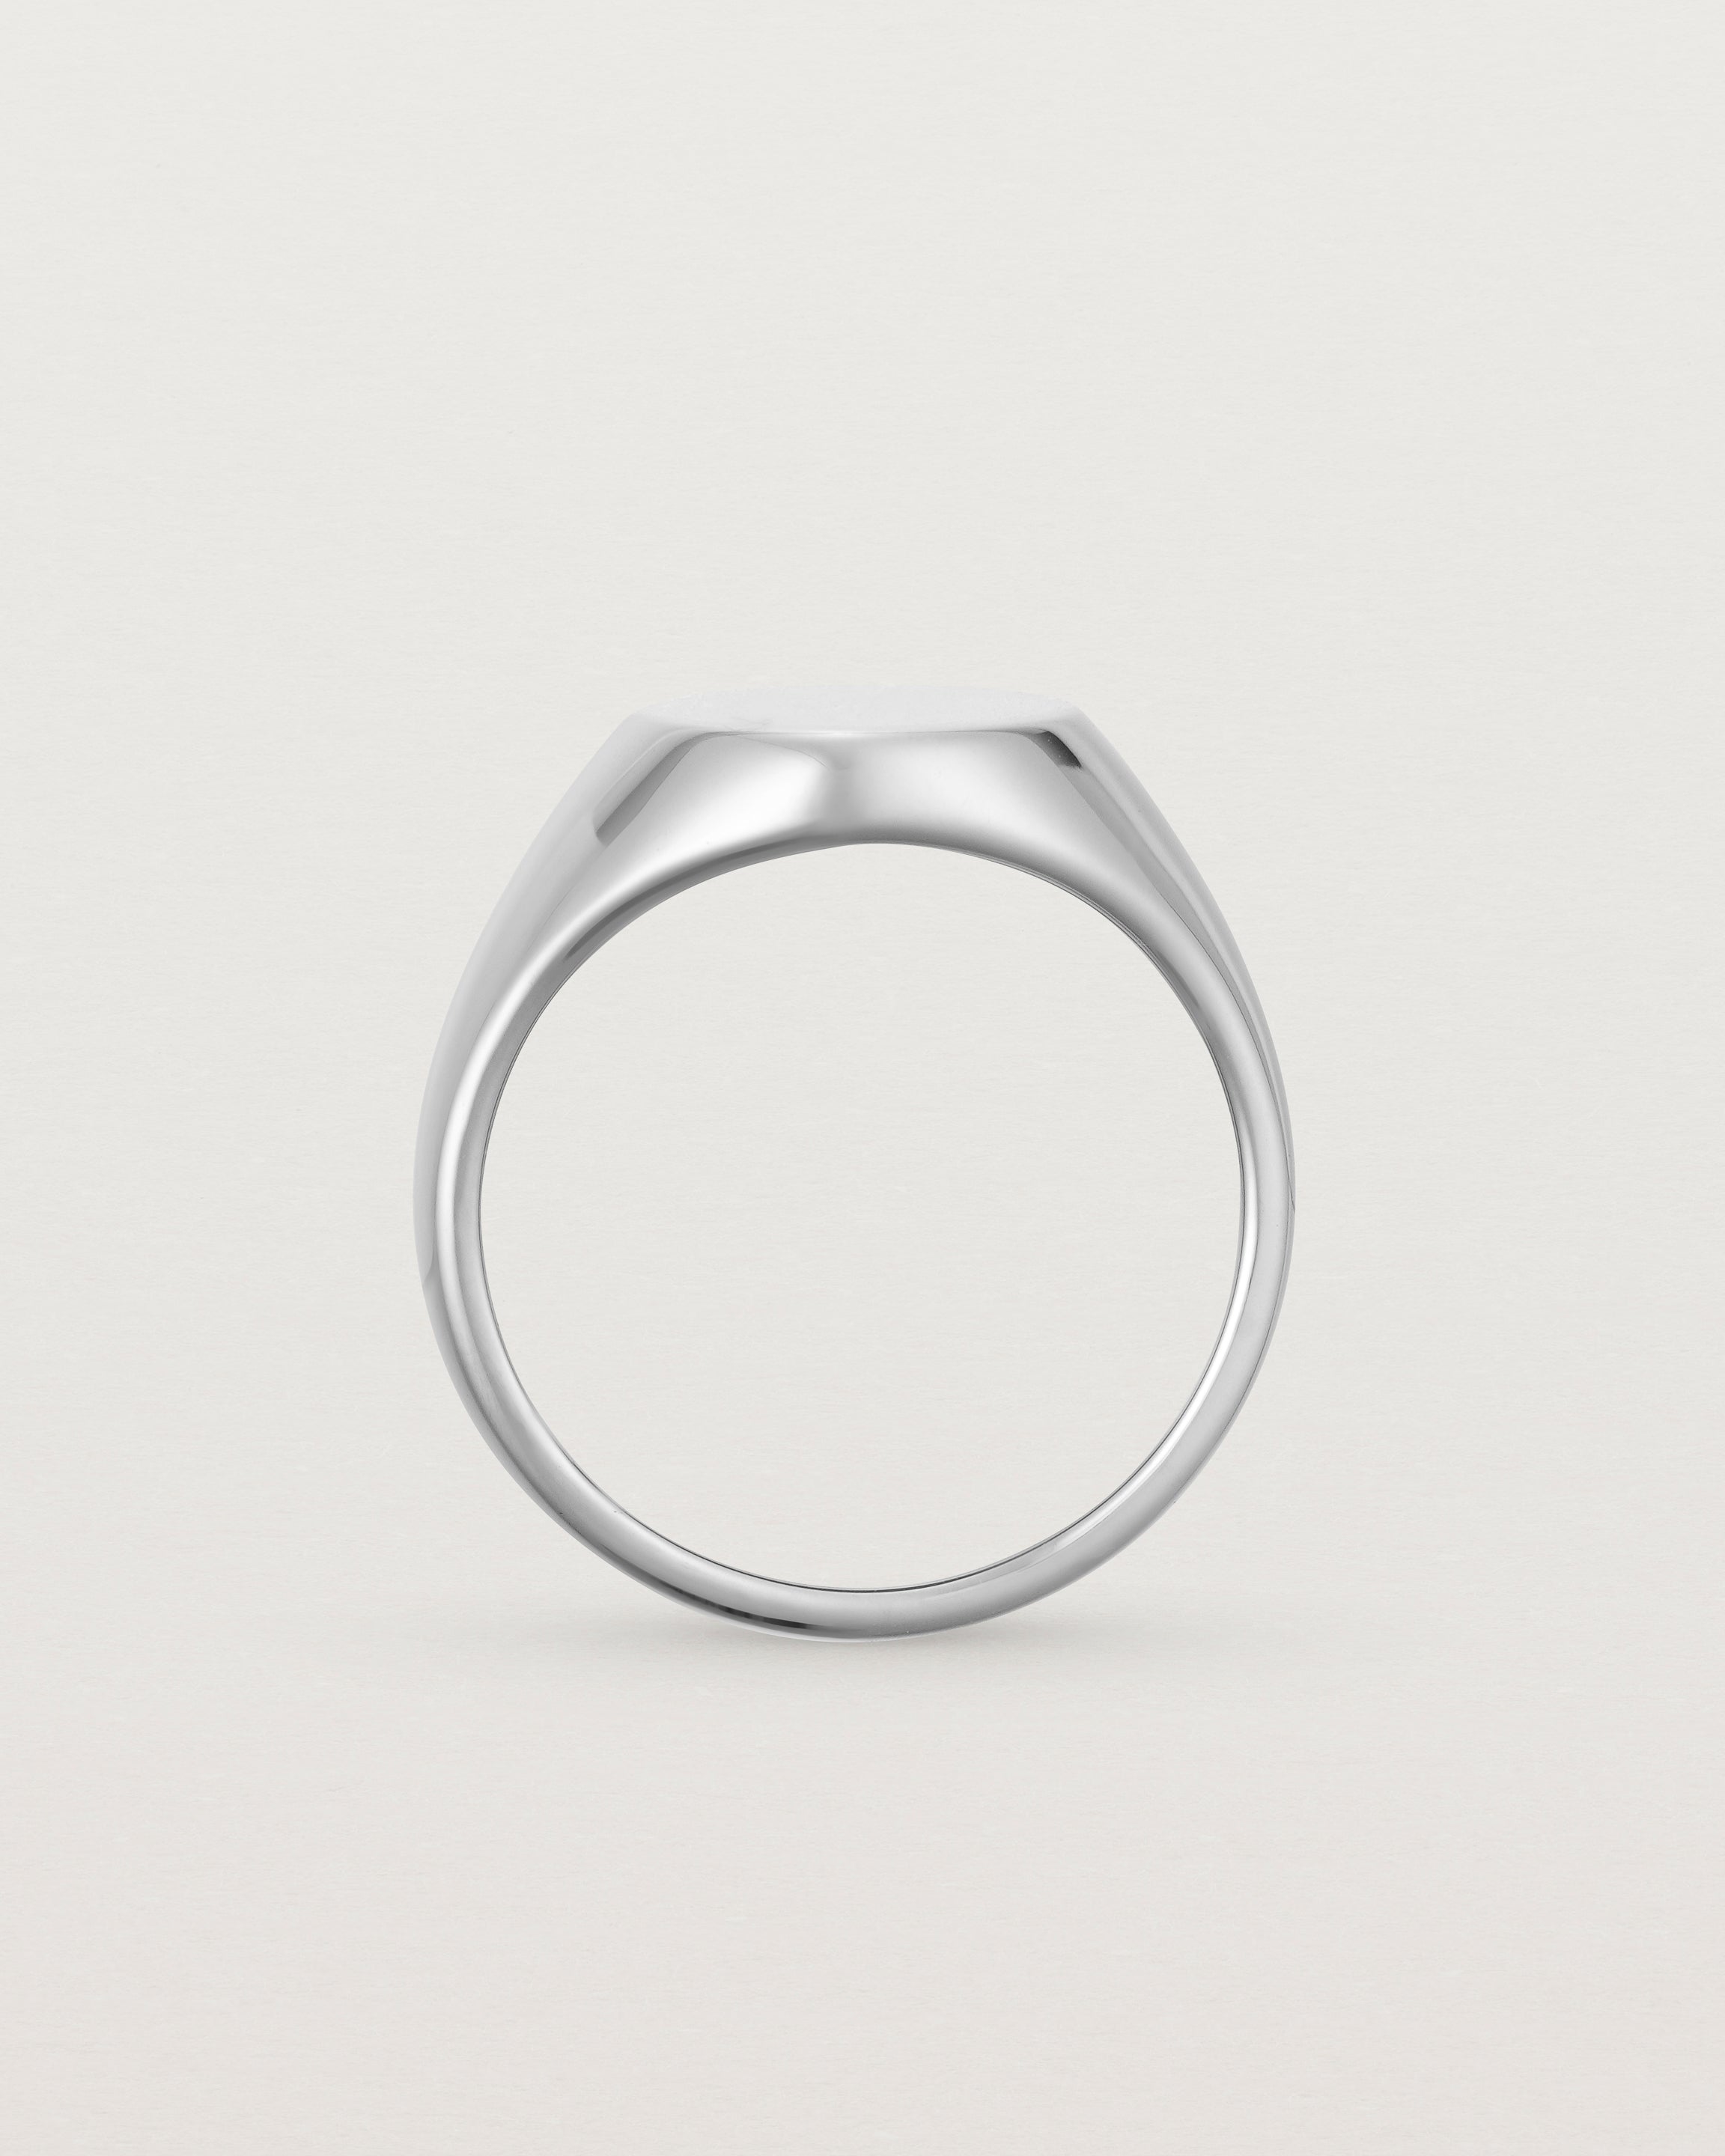 Standing view of the Kian Signet Ring | White Gold.